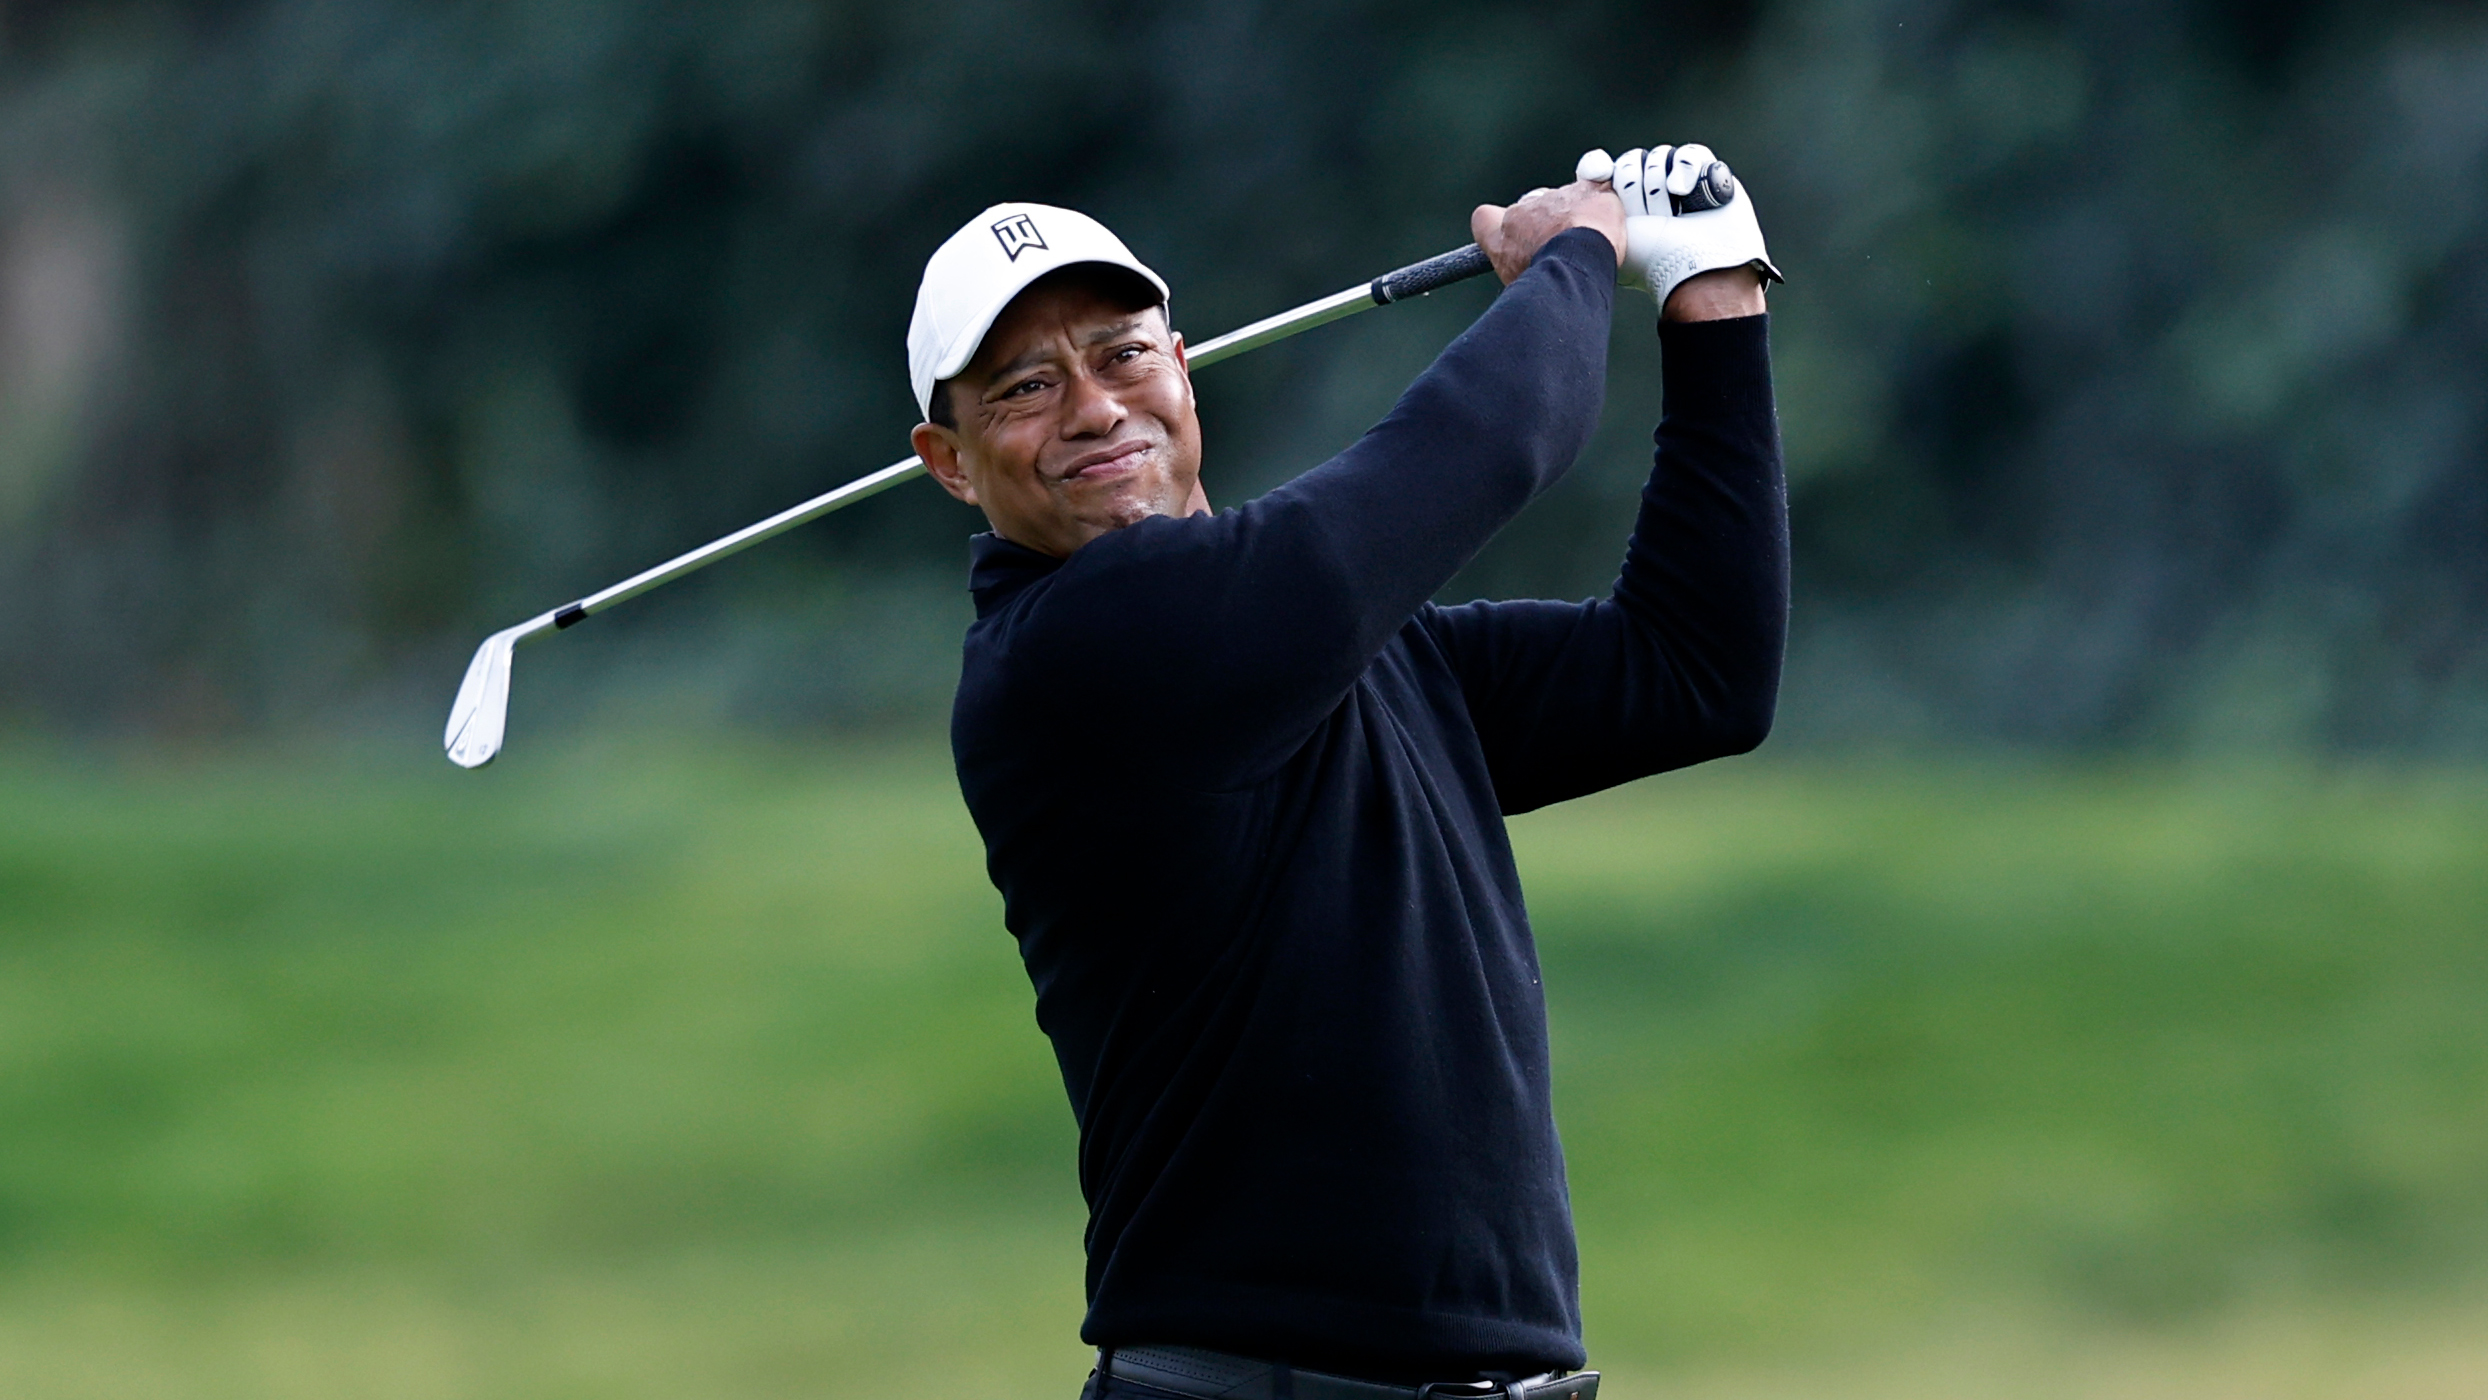 Tiger Woods Stumbles Late But Should Make Cut In PGA Tour Return Golf Monthly